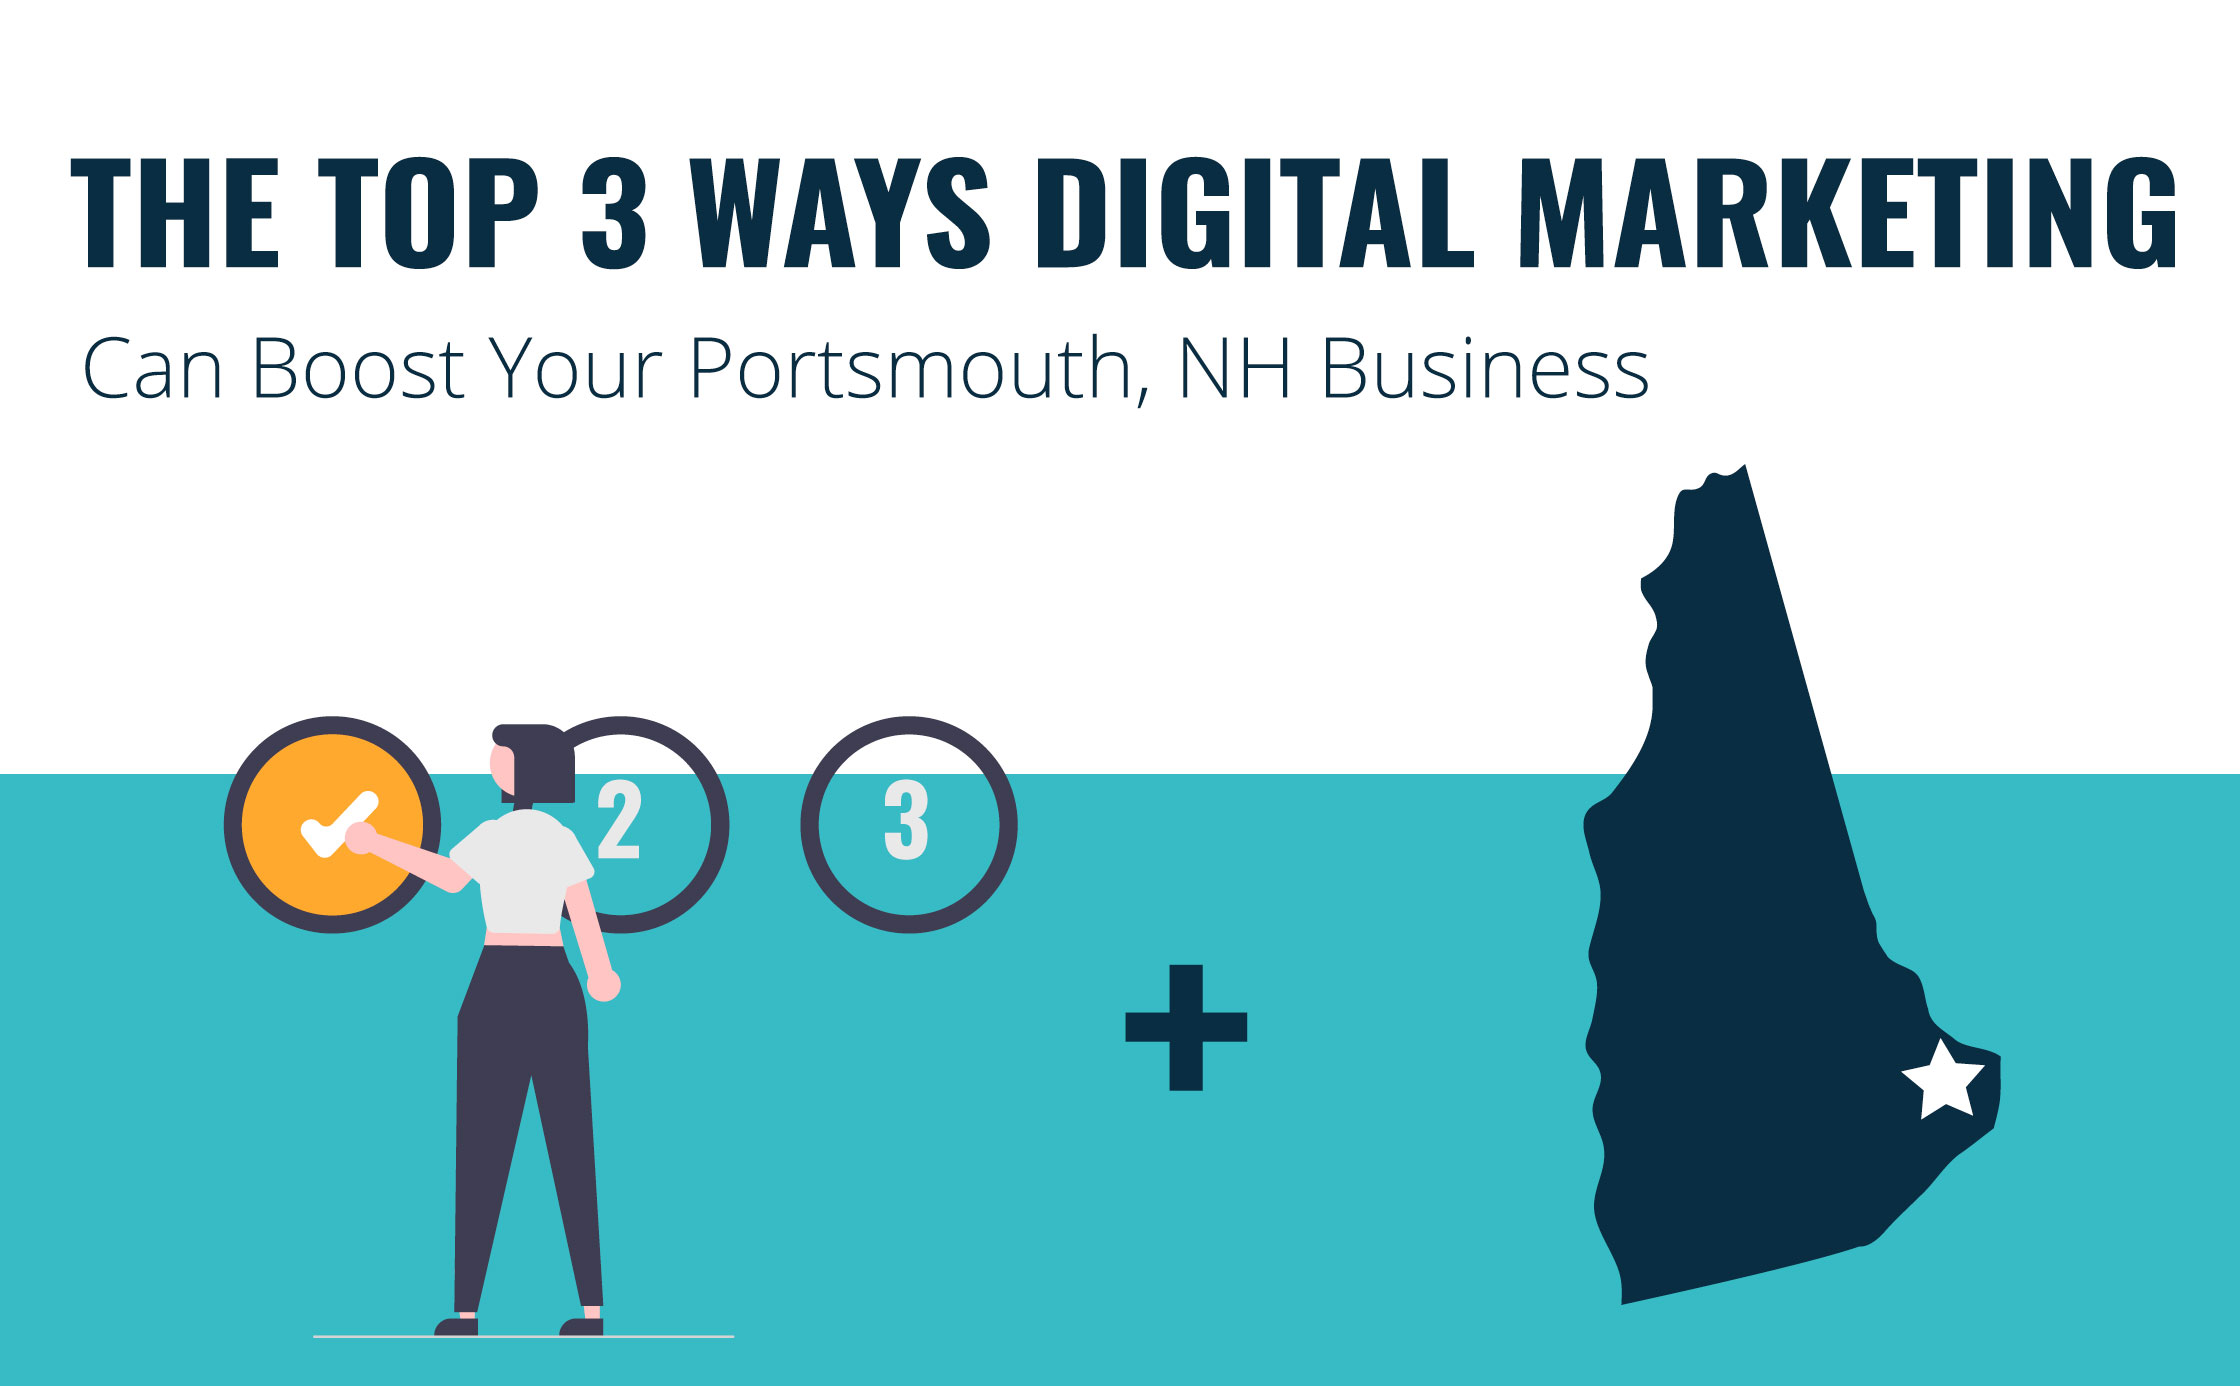 The Top 3 Ways Digital Marketing Can Boost Your Portsmouth, NH Business